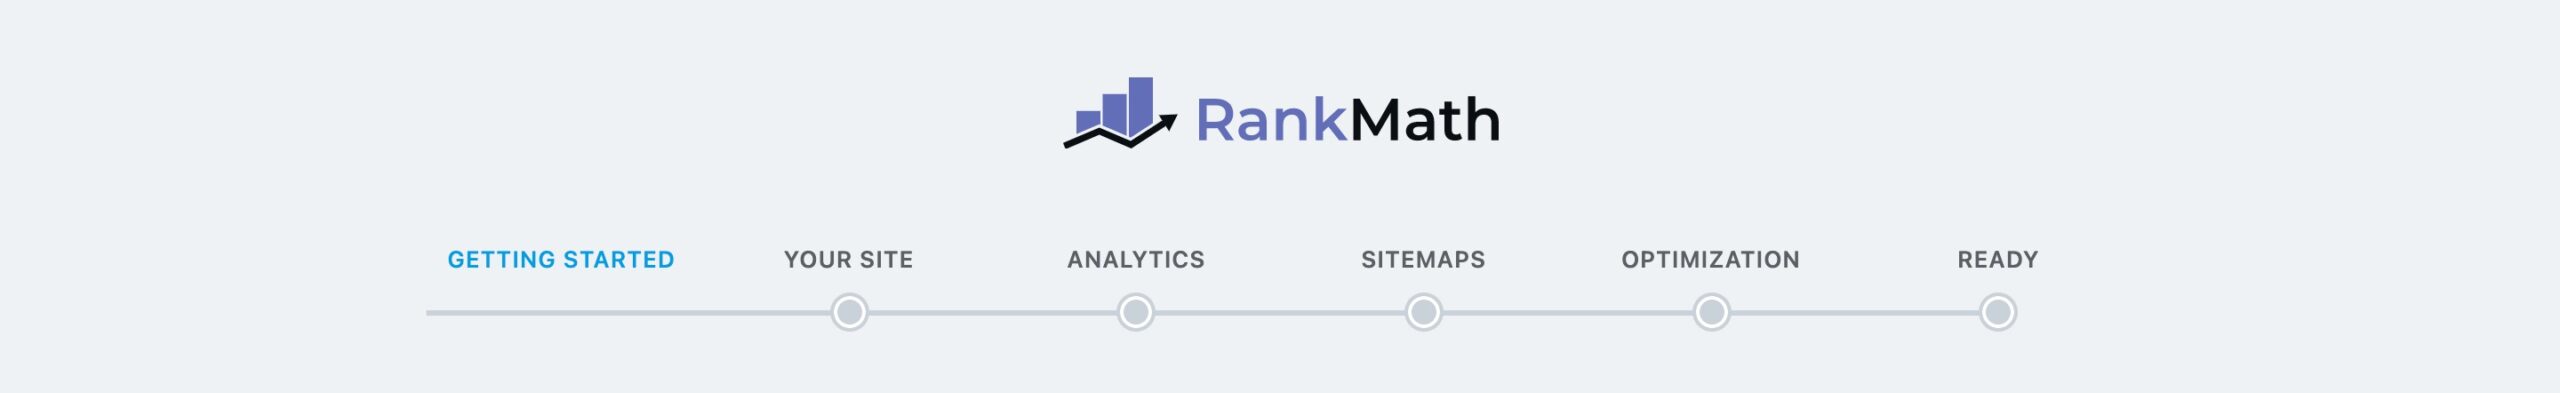 All The Settings On First Page In Rank Math Setup Process